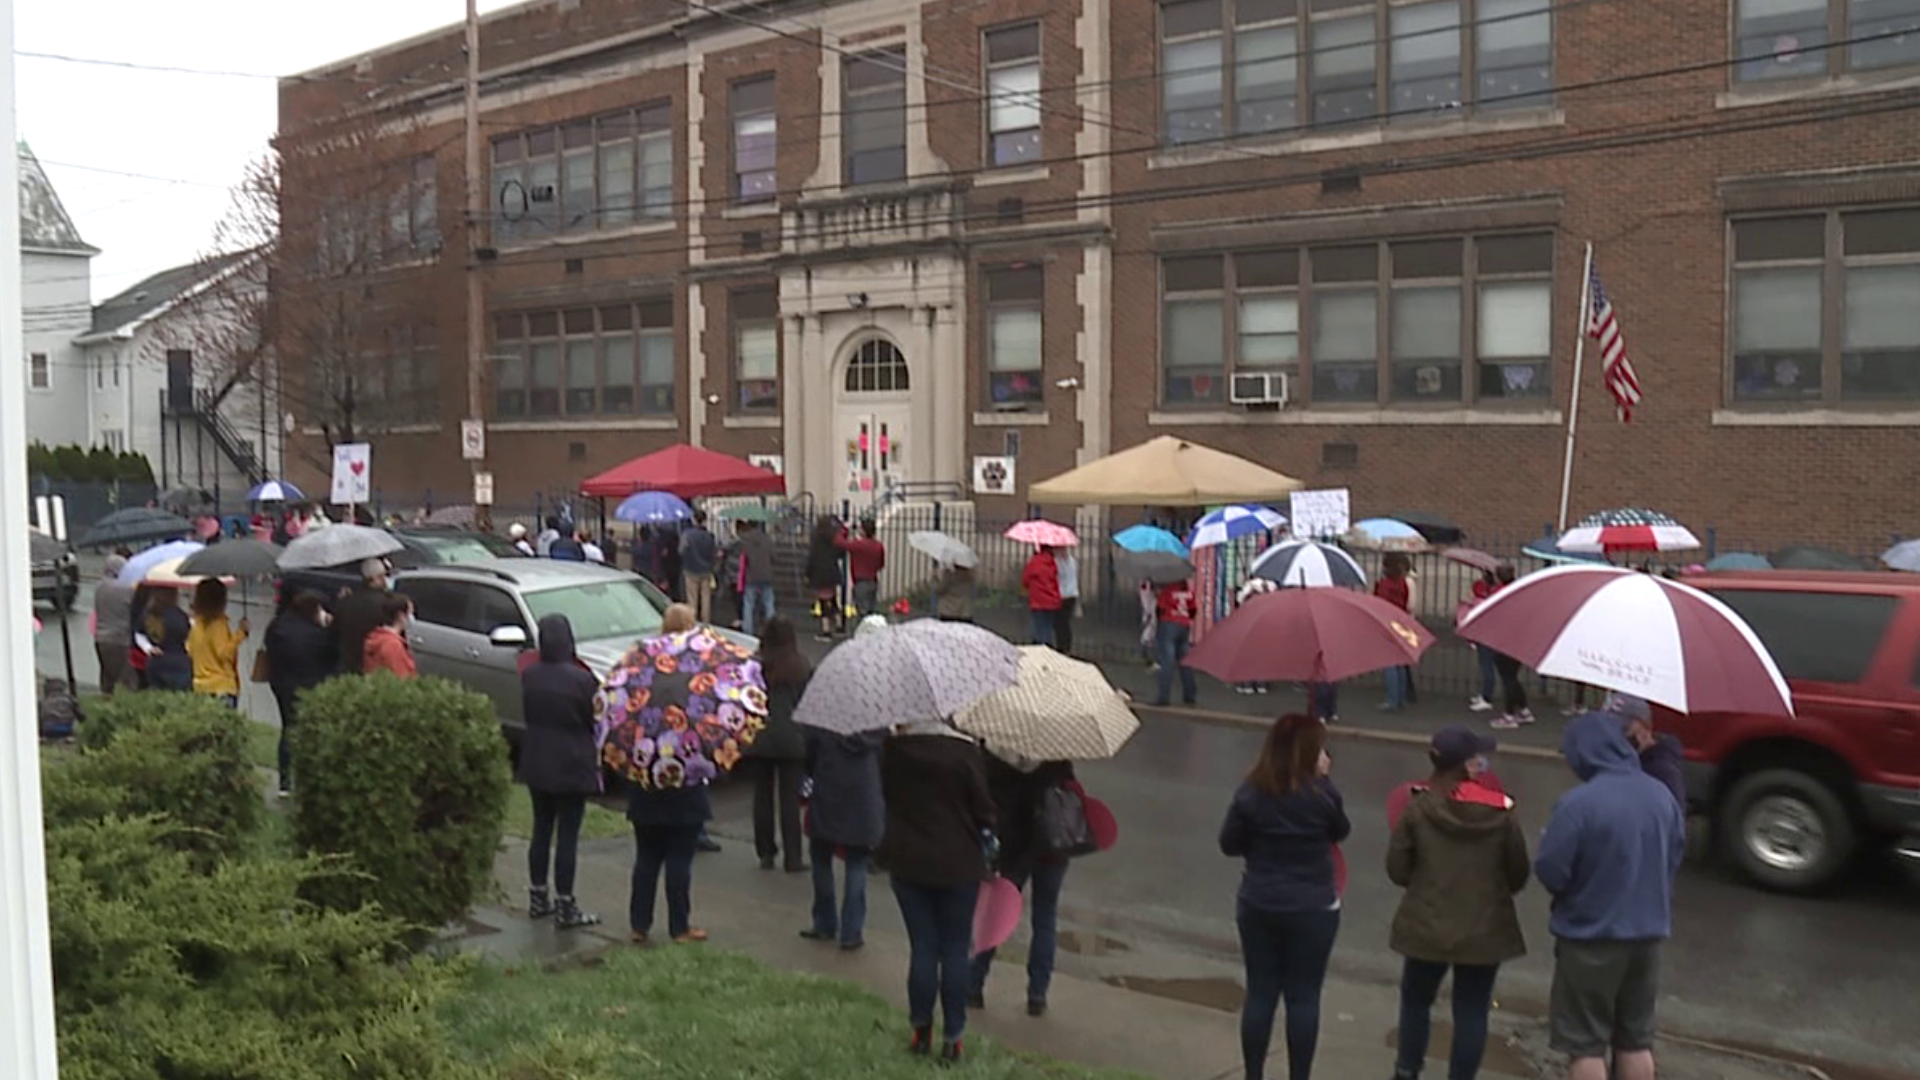 School officials have proposed shutting down the elementary school, which has been met with opposition from students and parents.